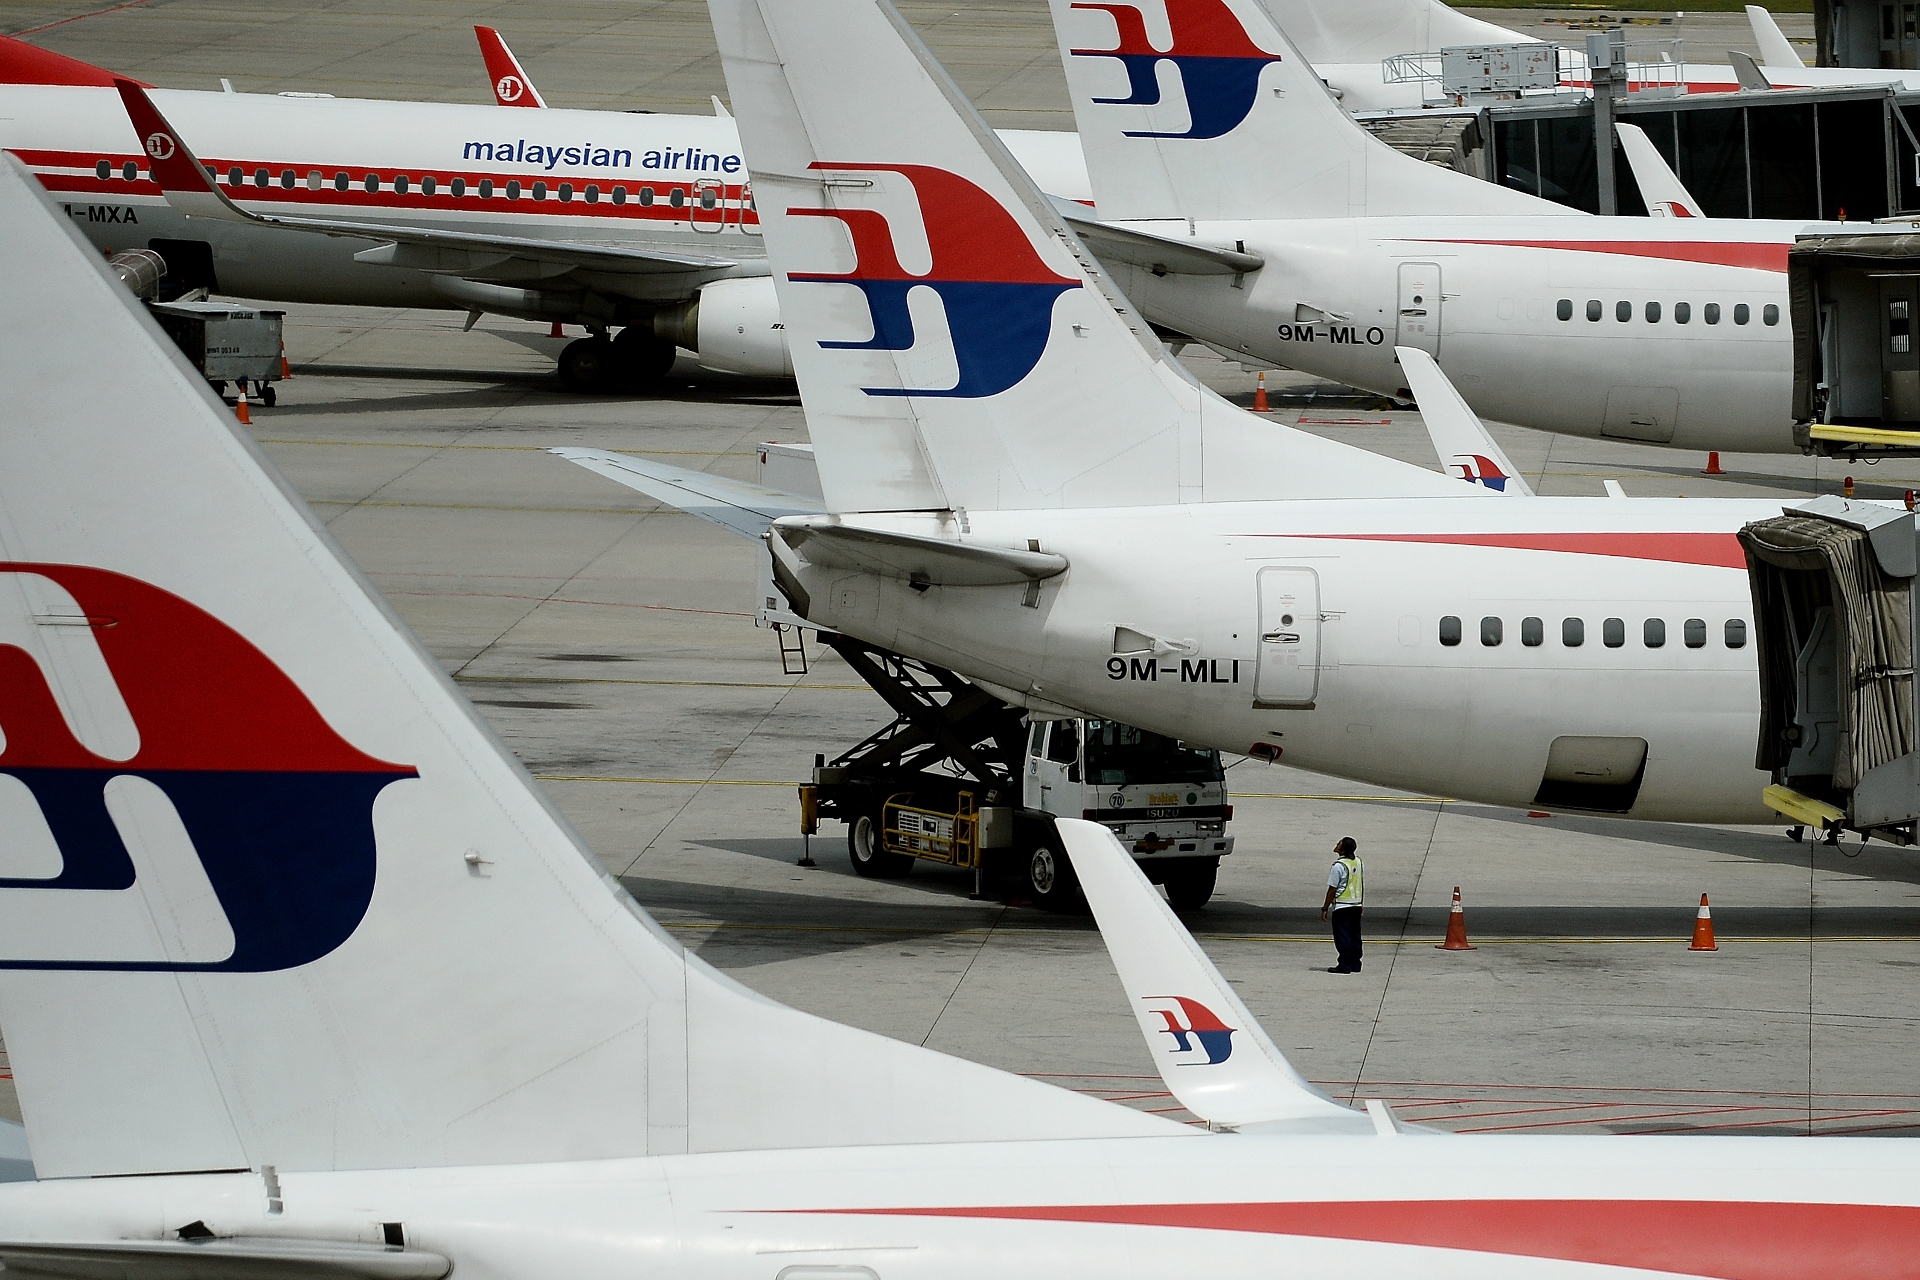 Volo Malaysia Airlines 370